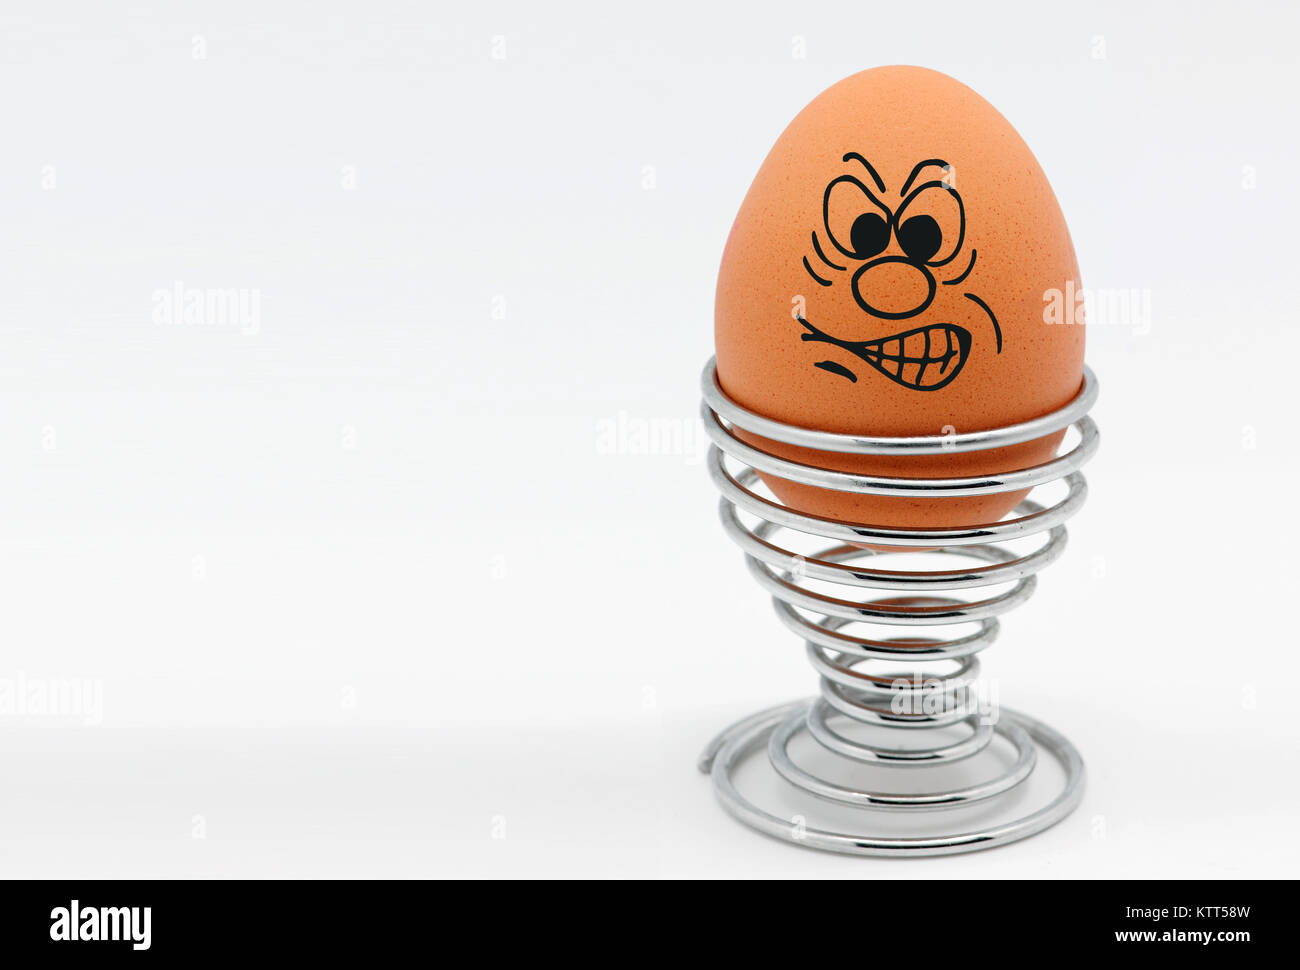 https://c8.alamy.com/comp/KTT58W/an-egg-in-an-egg-cup-with-an-angry-face-KTT58W.jpg